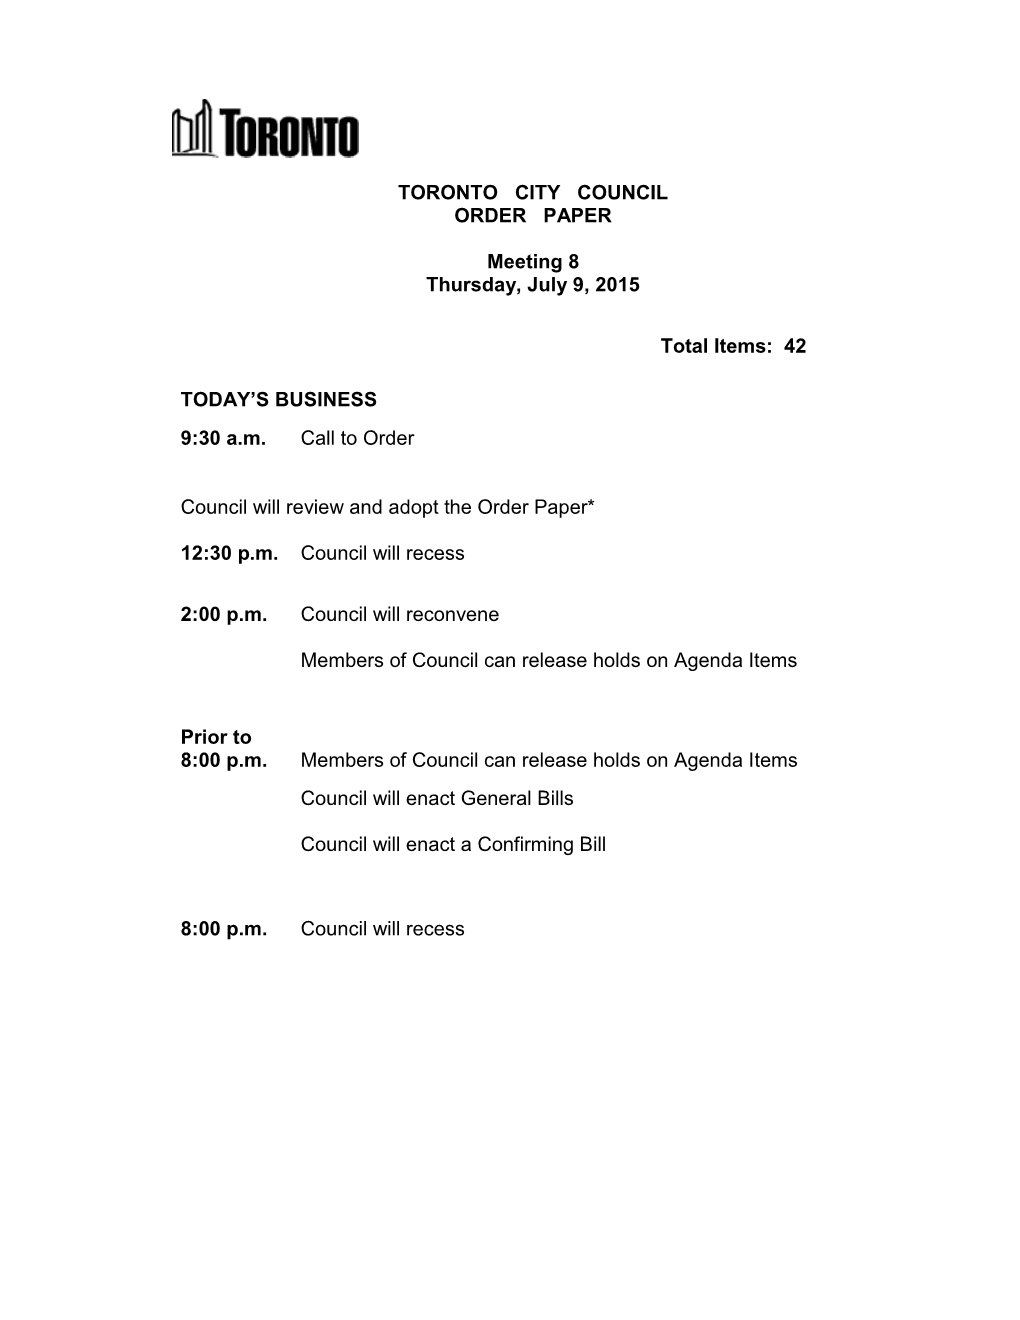 TORONTO CITY COUNCIL ORDER PAPER Meeting 8 Thursday, July 9